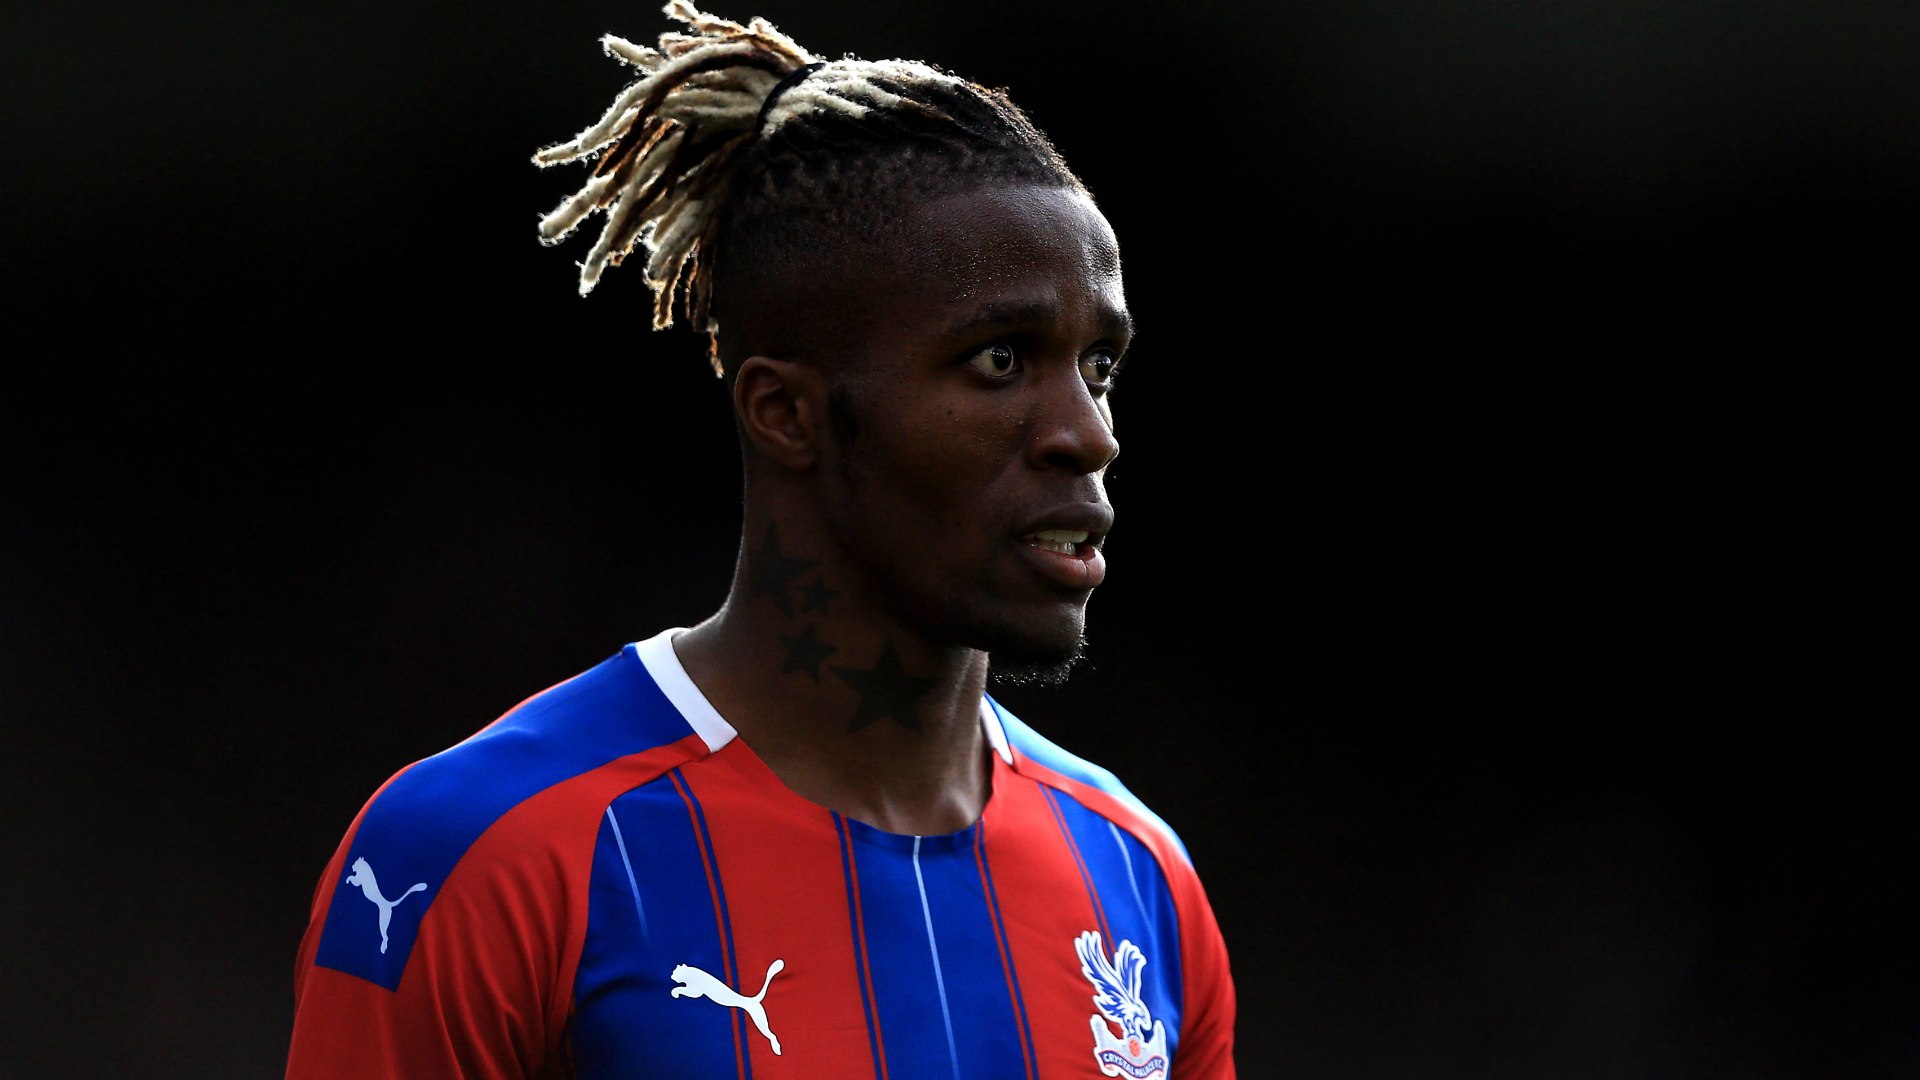 Wilfried Zaha was targeted by racist social media posts from an account seemingly belonging to an Aston Villa fan.